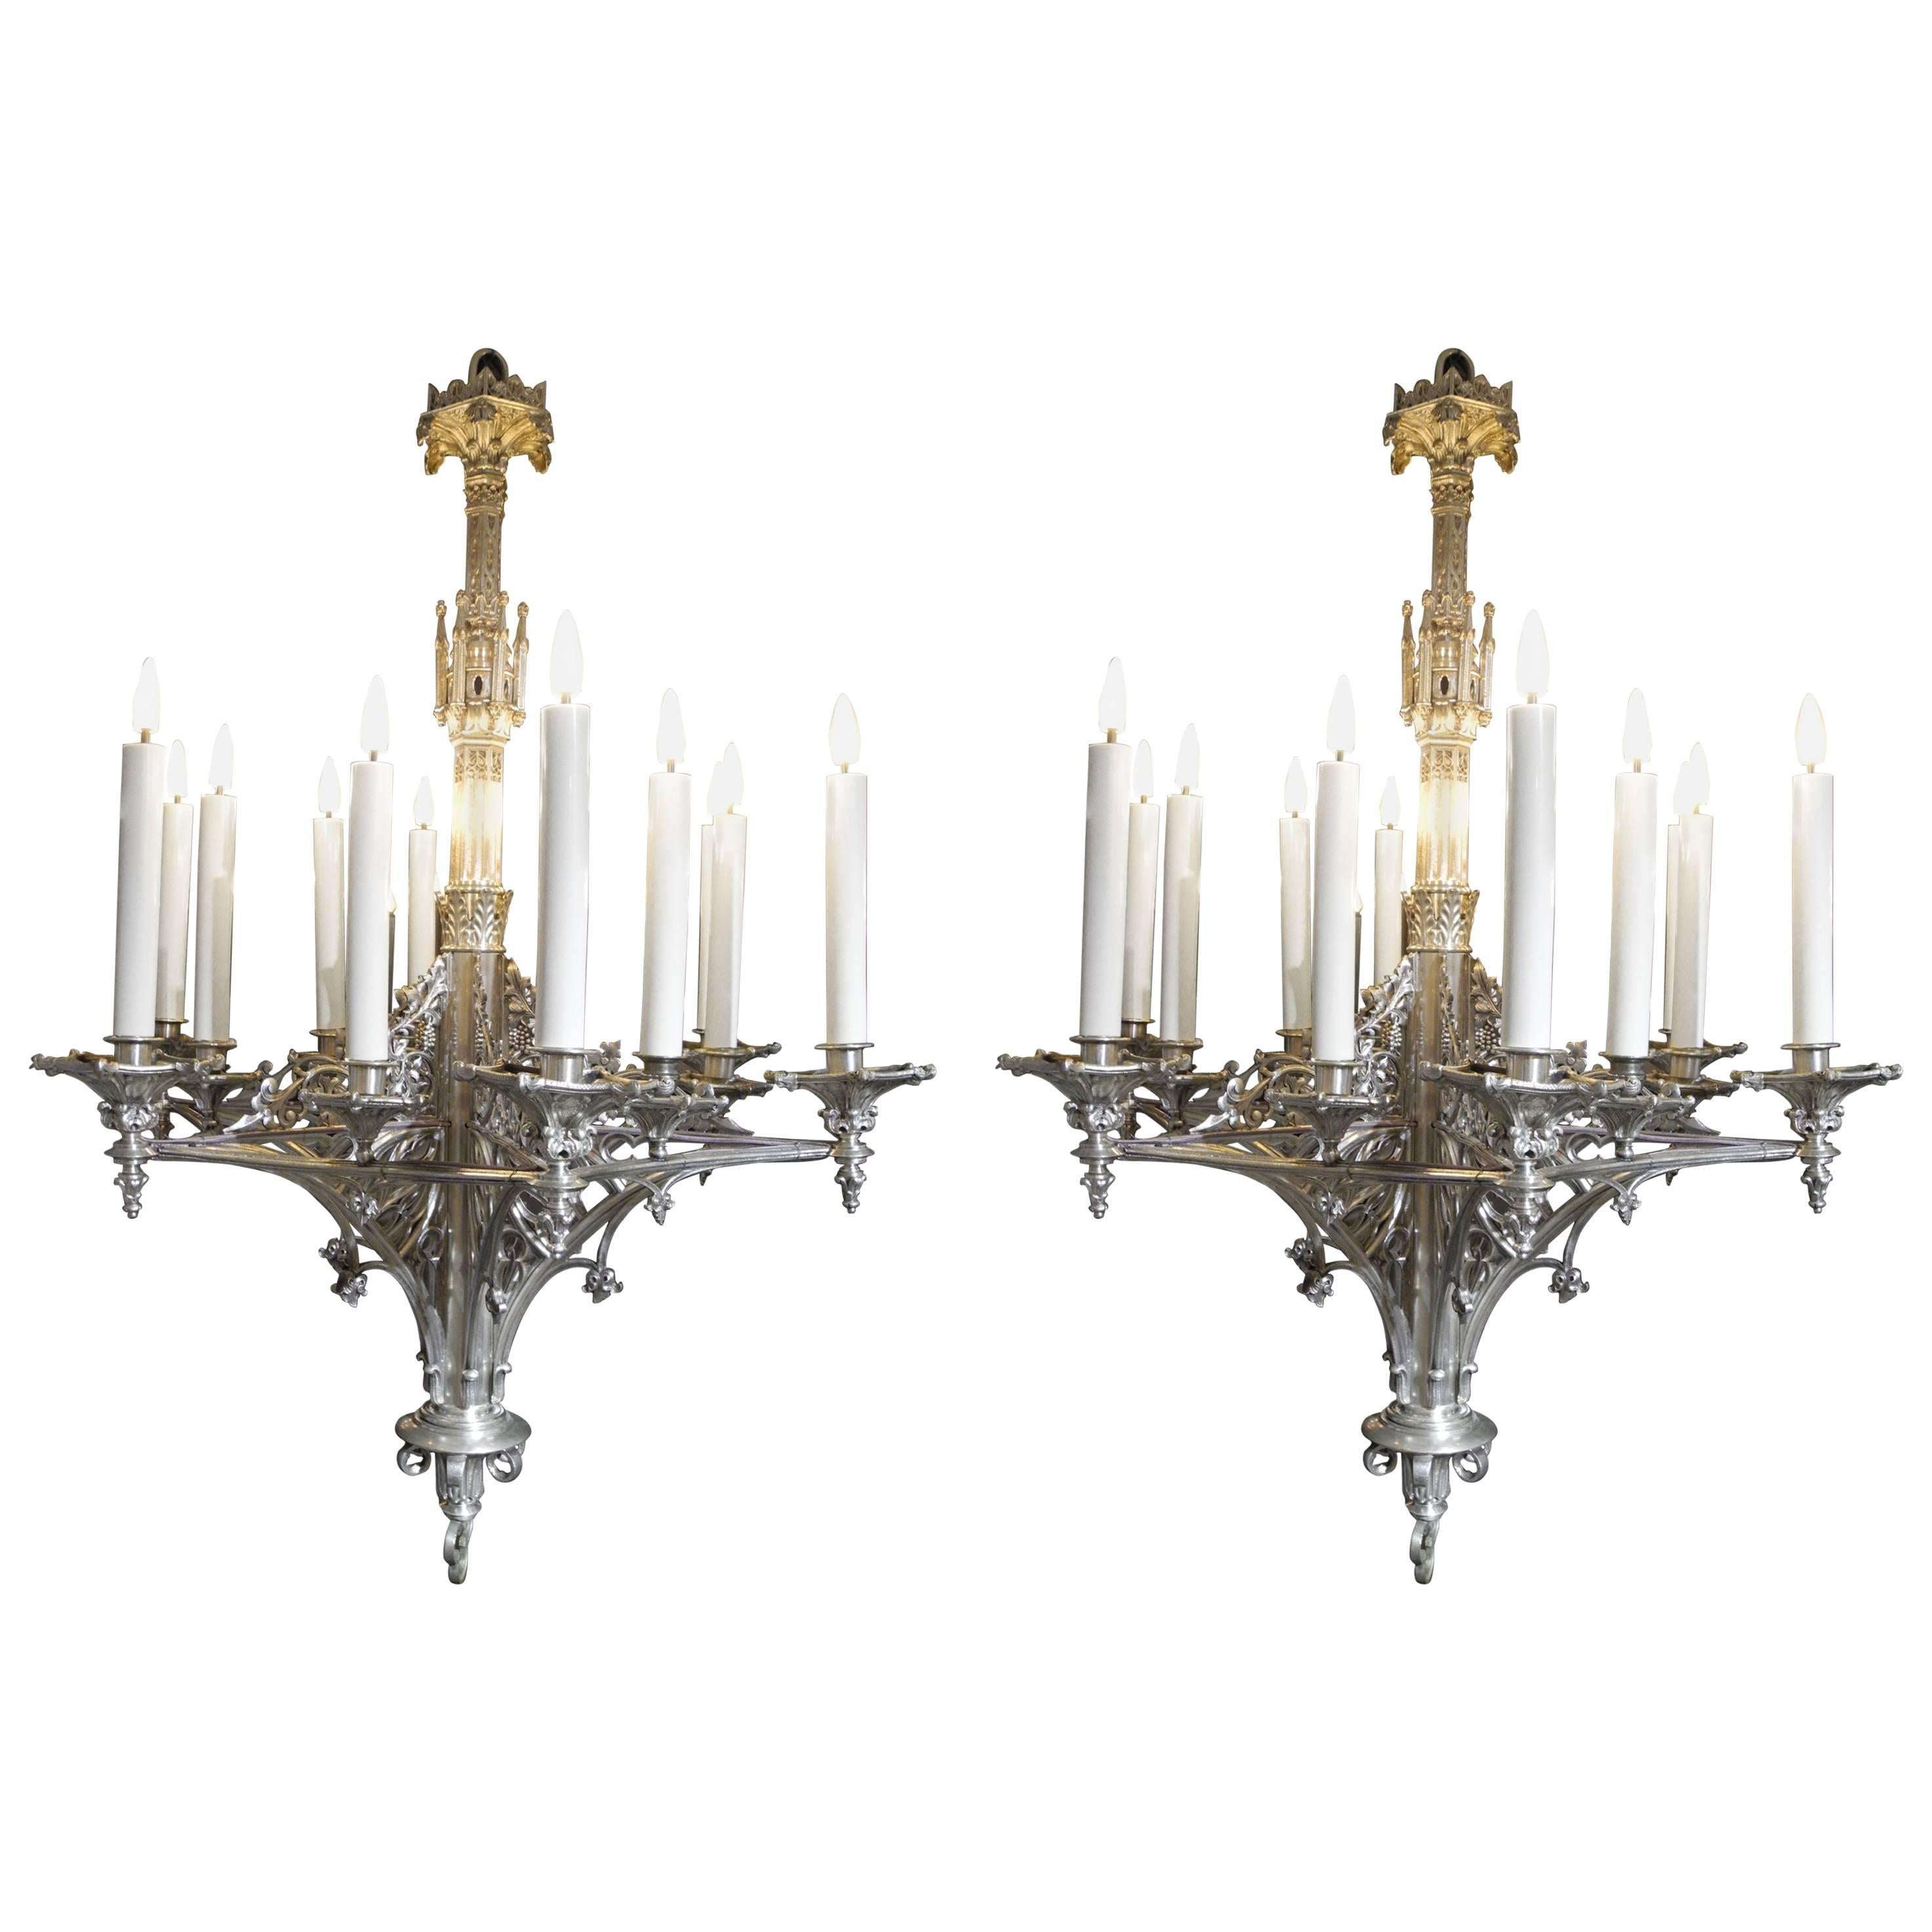 Pair of 12 Lights Neo-Gothic Chandeliers For Sale